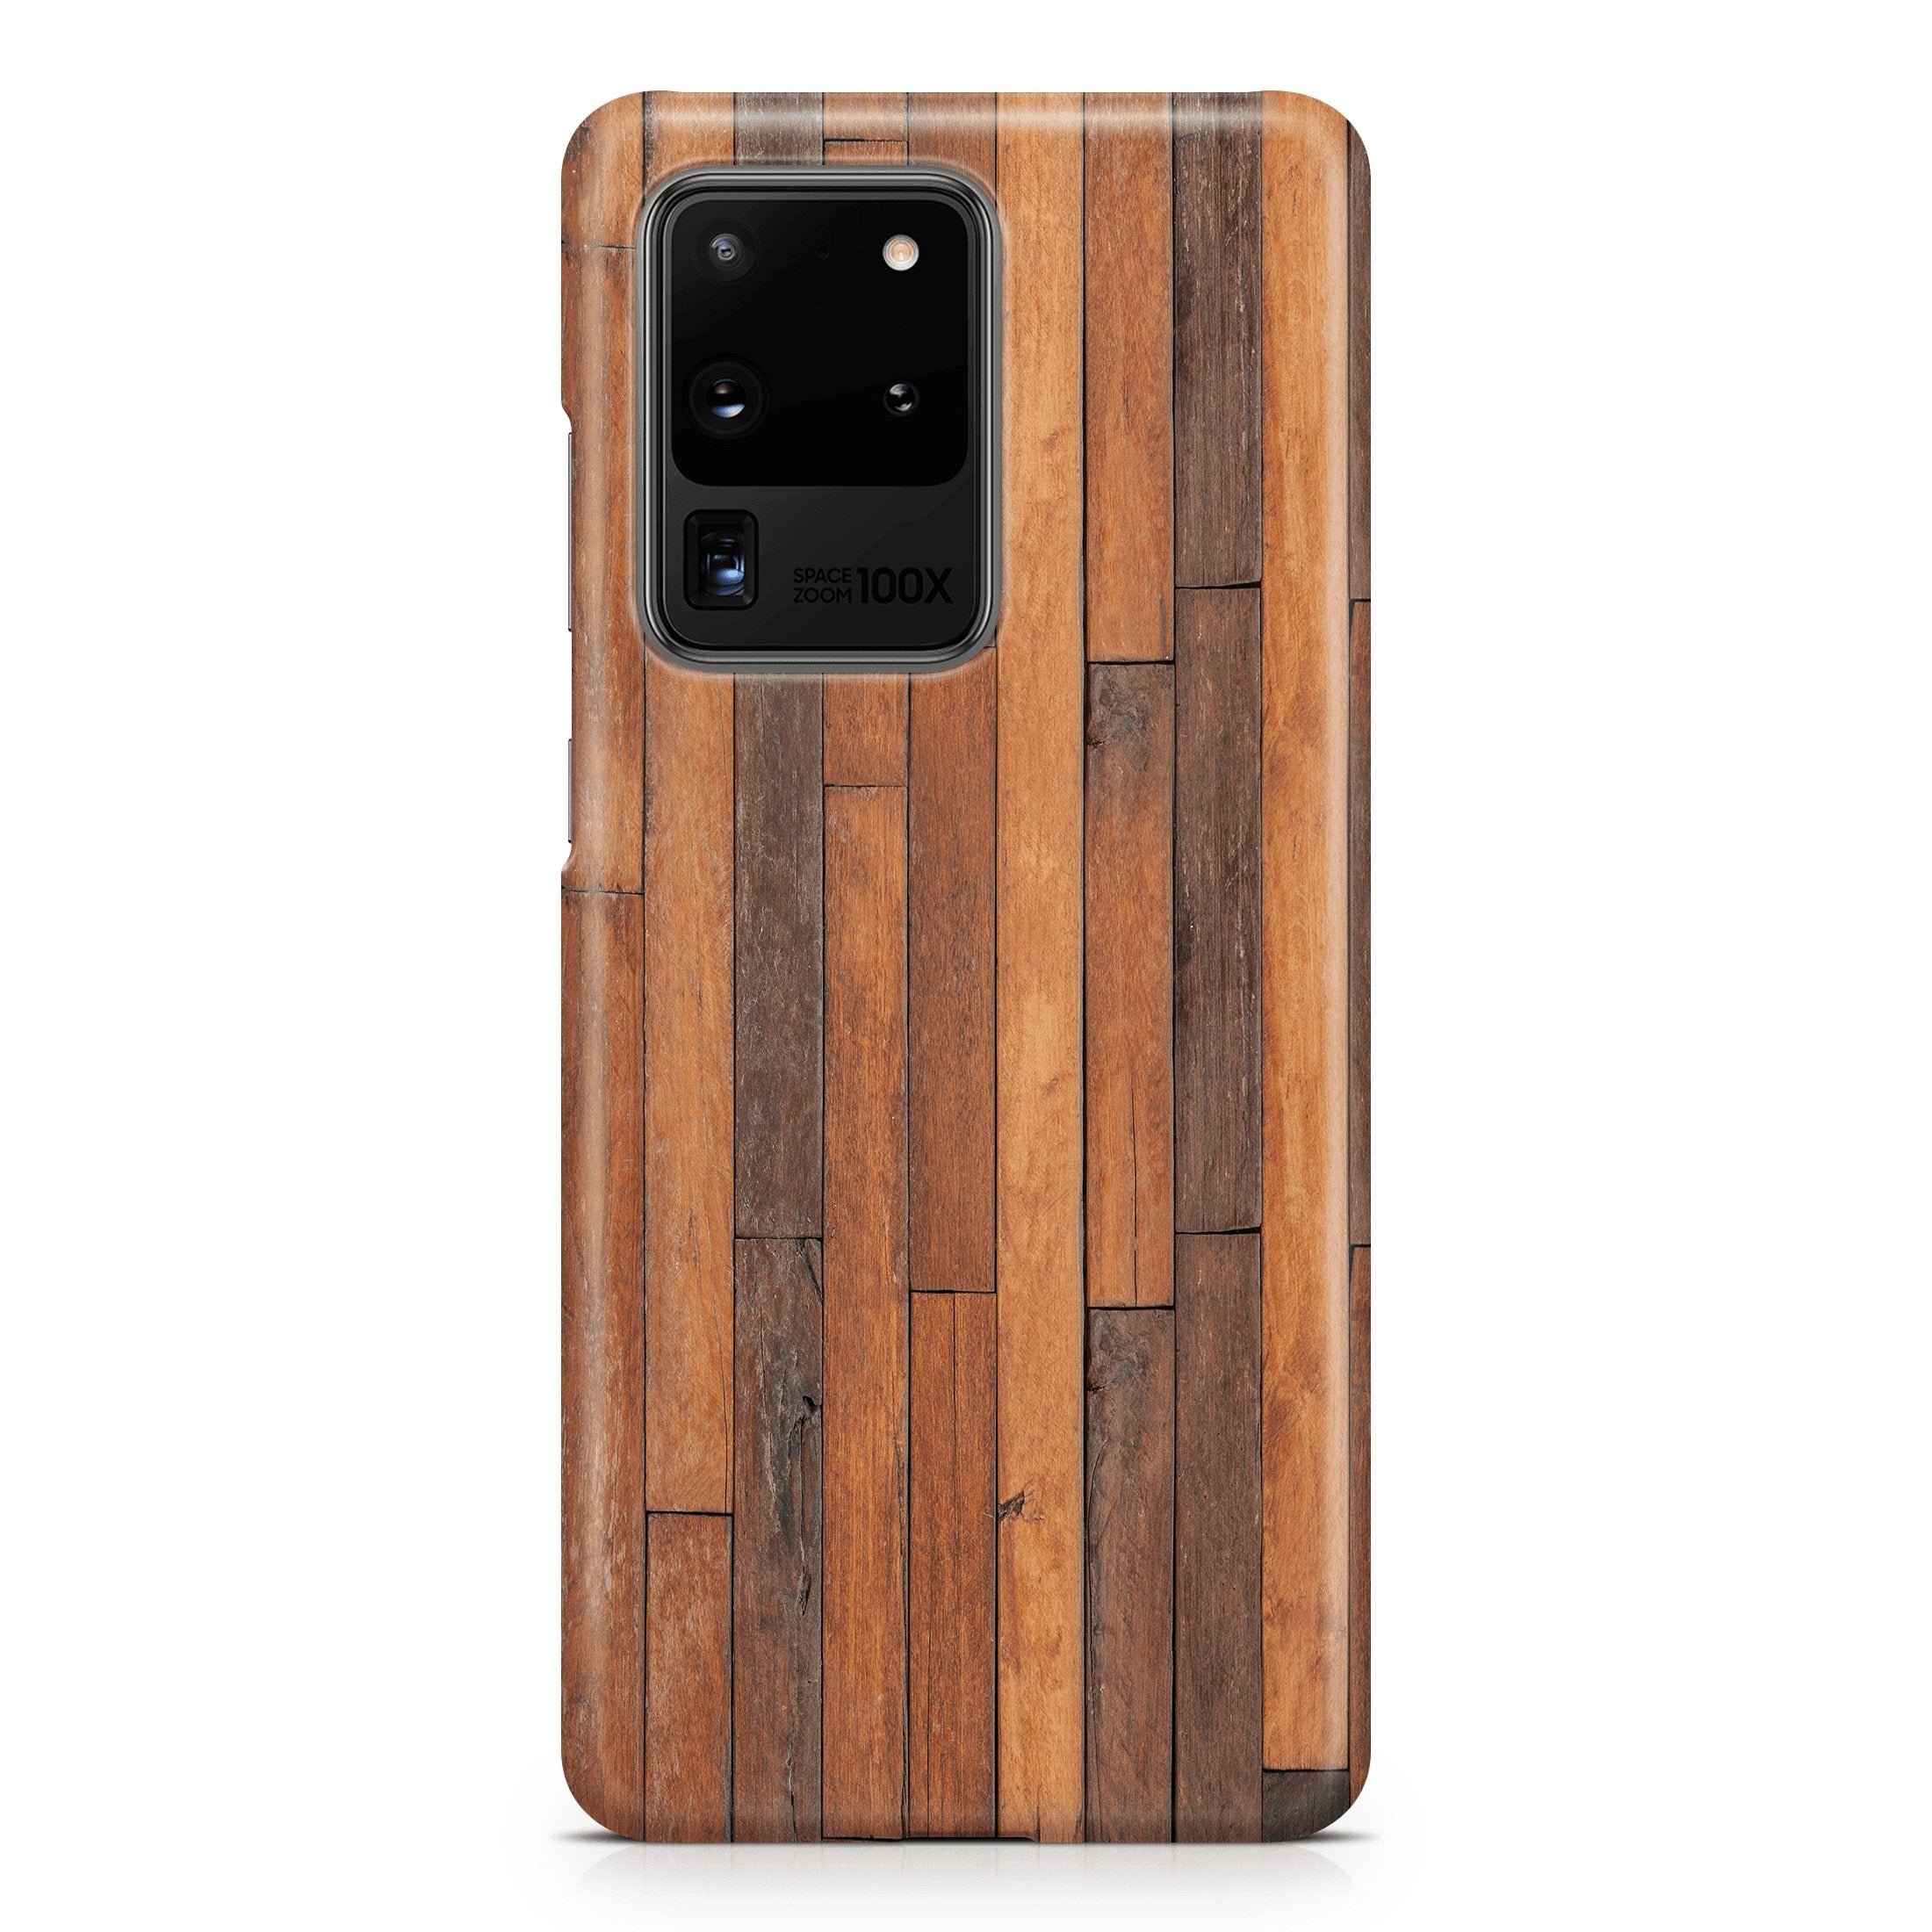 Rustic Steps - Samsung phone case designs by CaseSwagger